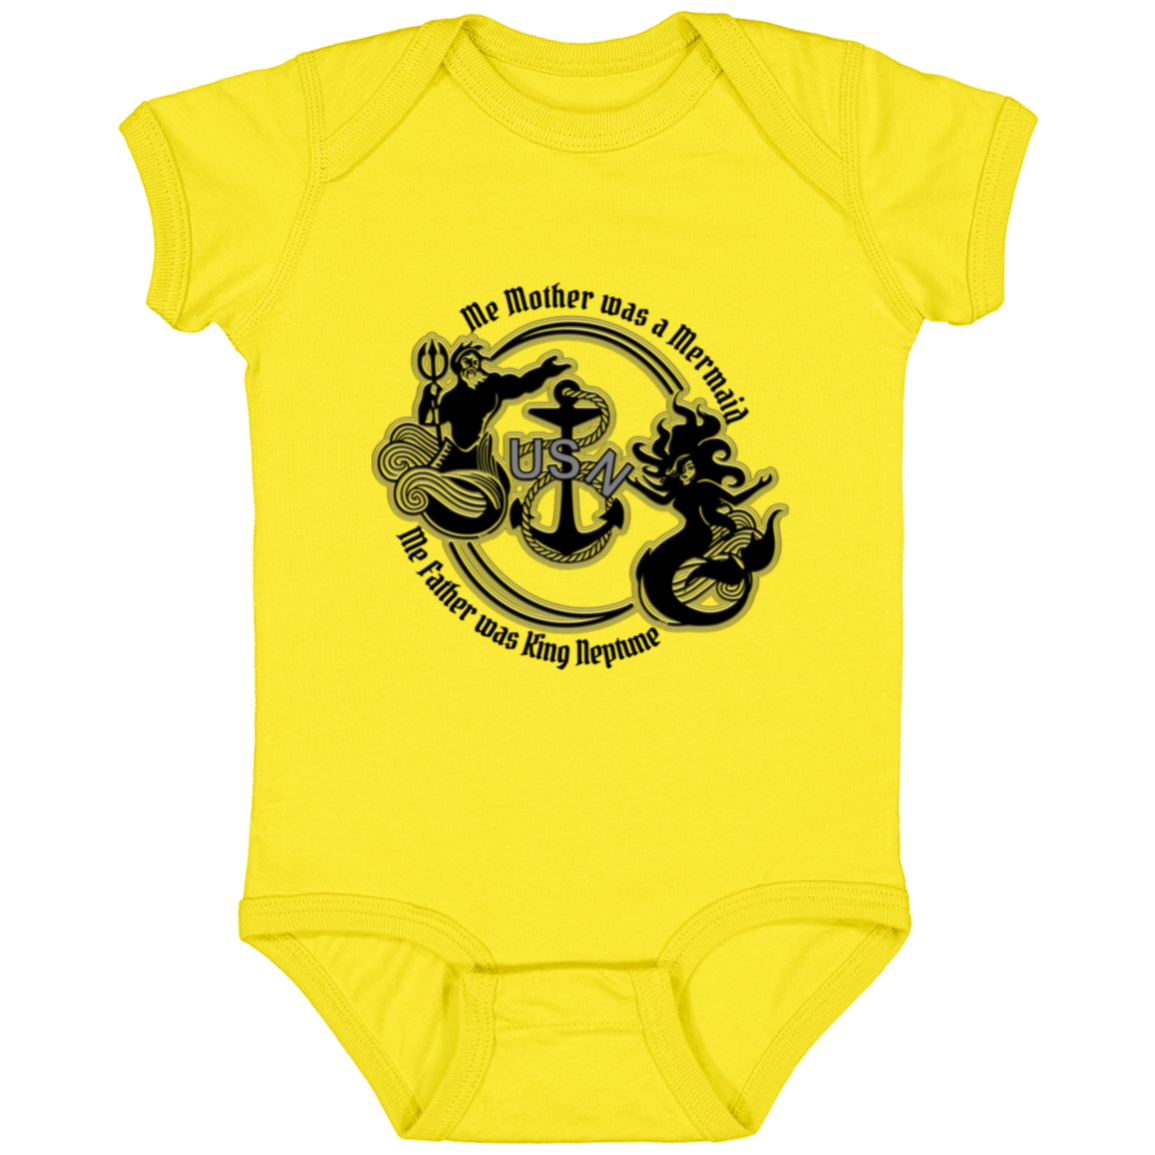 Me Mother and Father V2 Infant Jersey Bodysuit Onsie